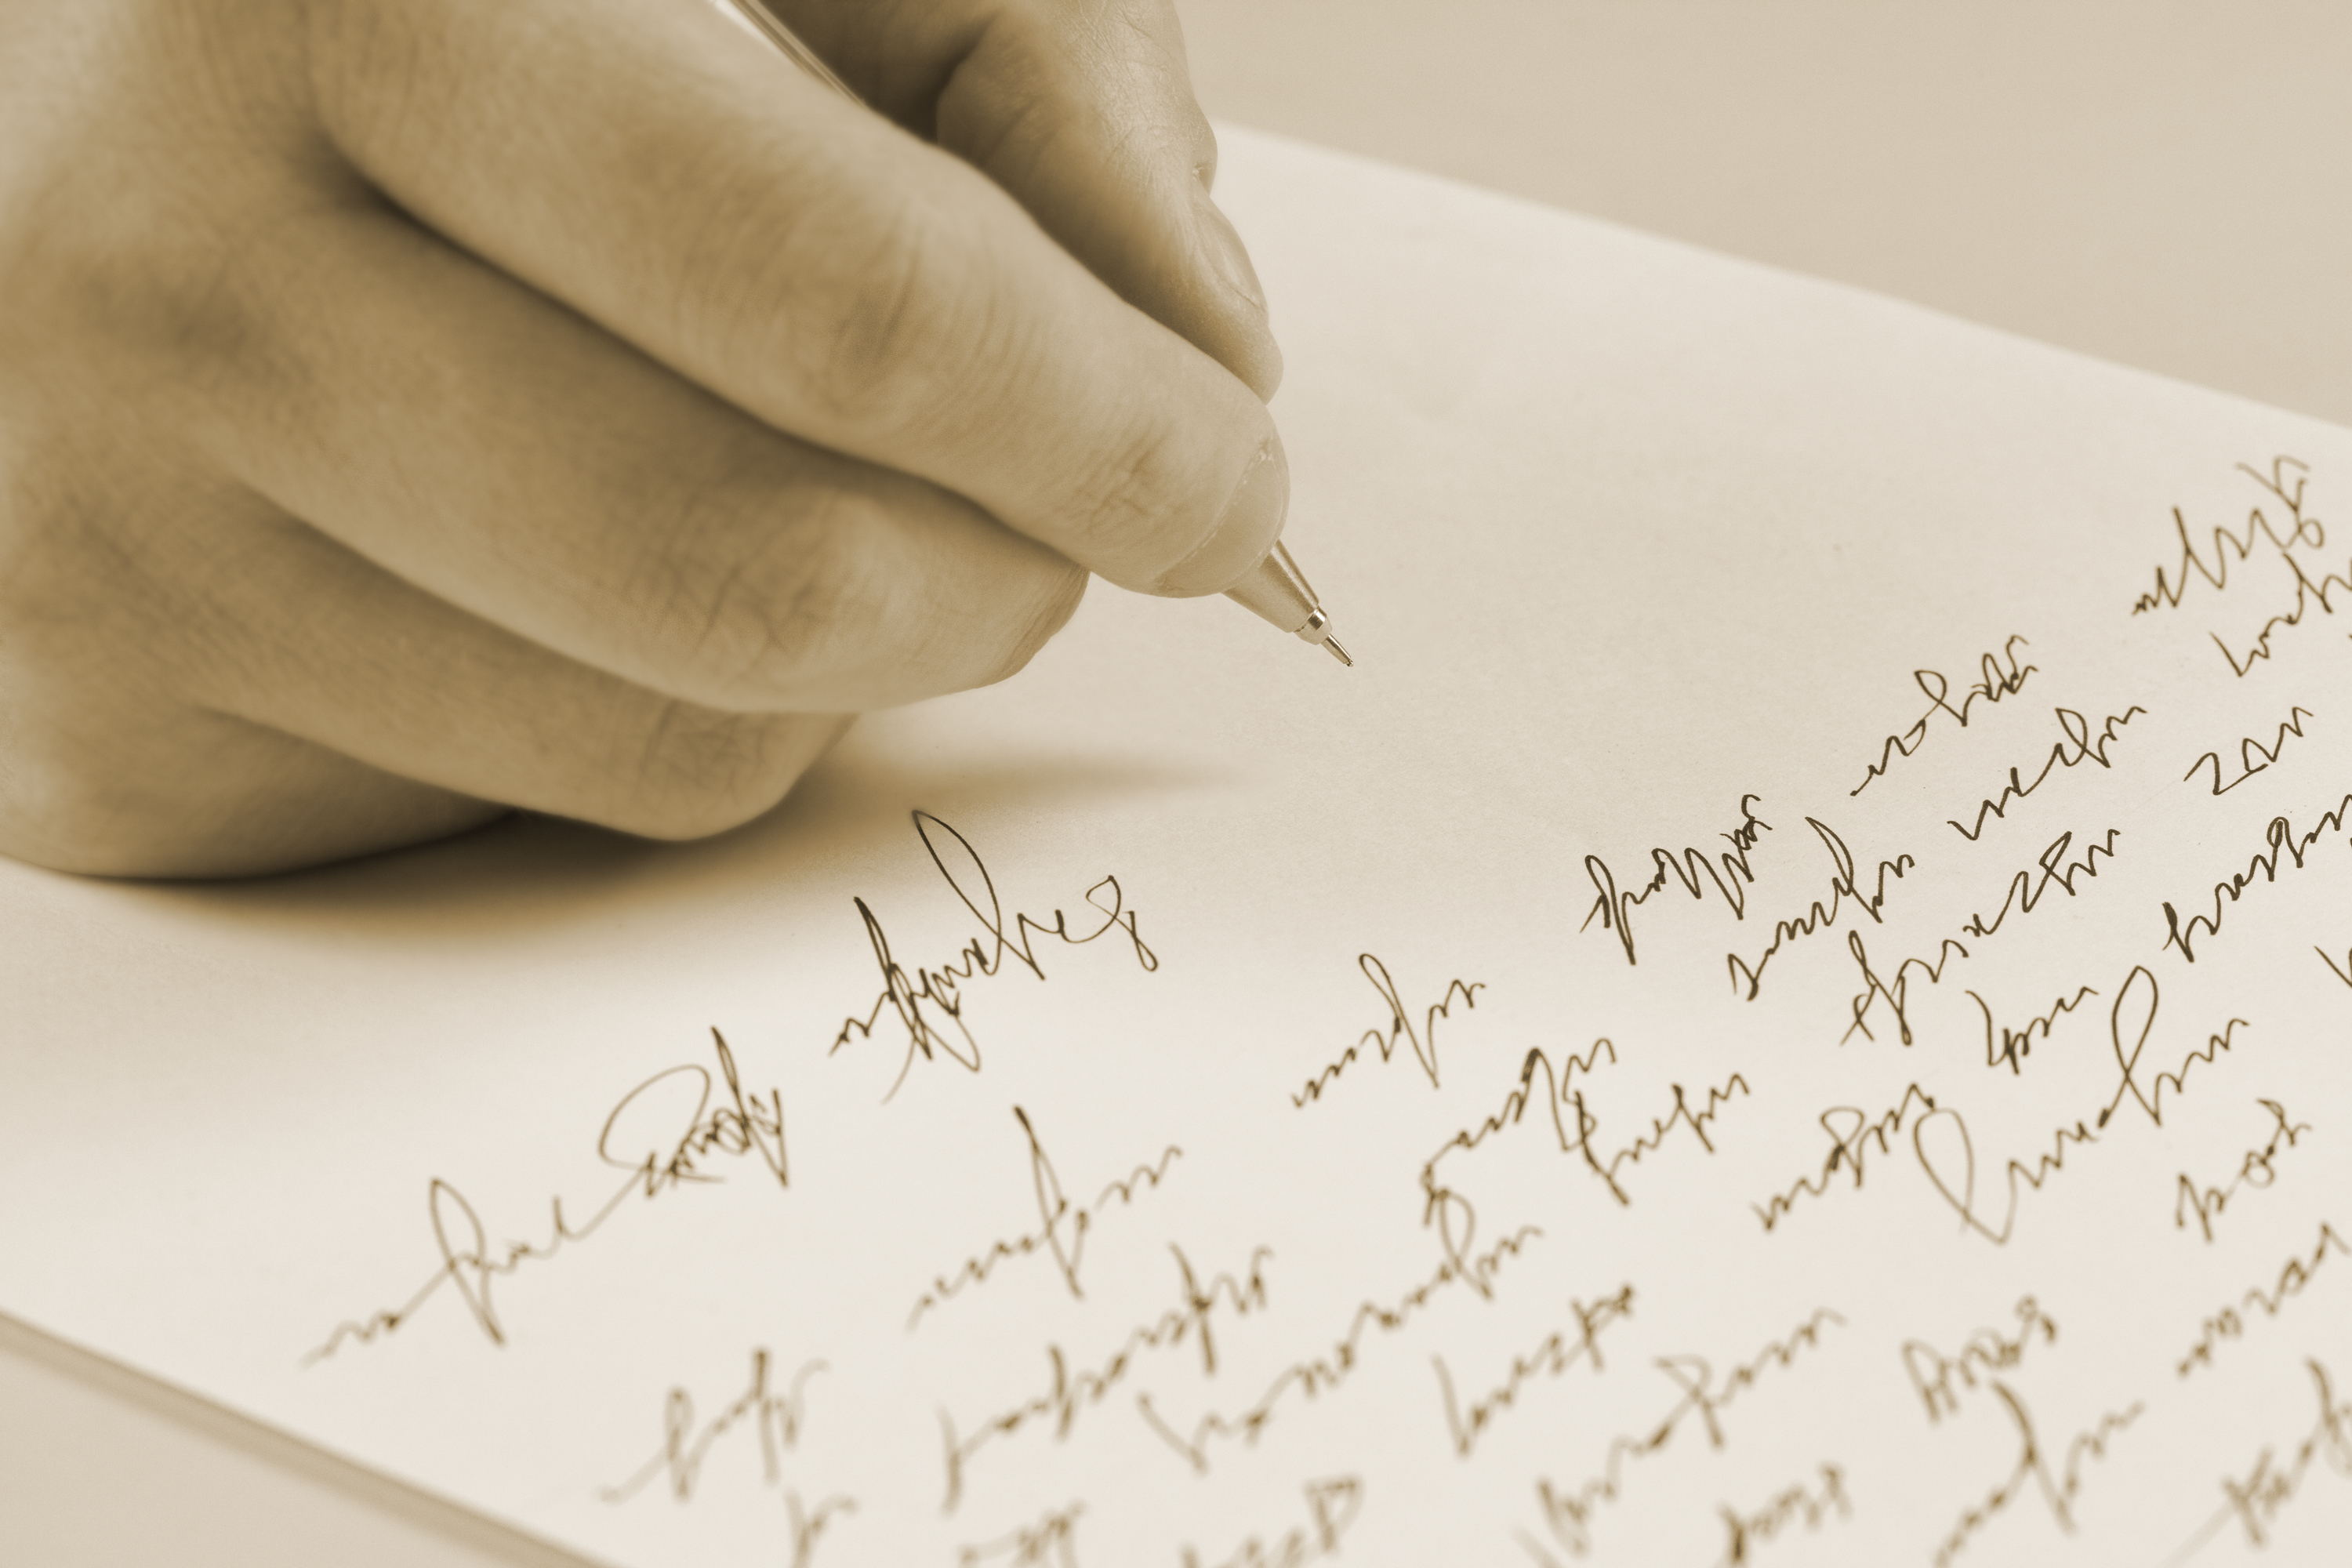 Male hand writing on a paper | Source: Shutterstock